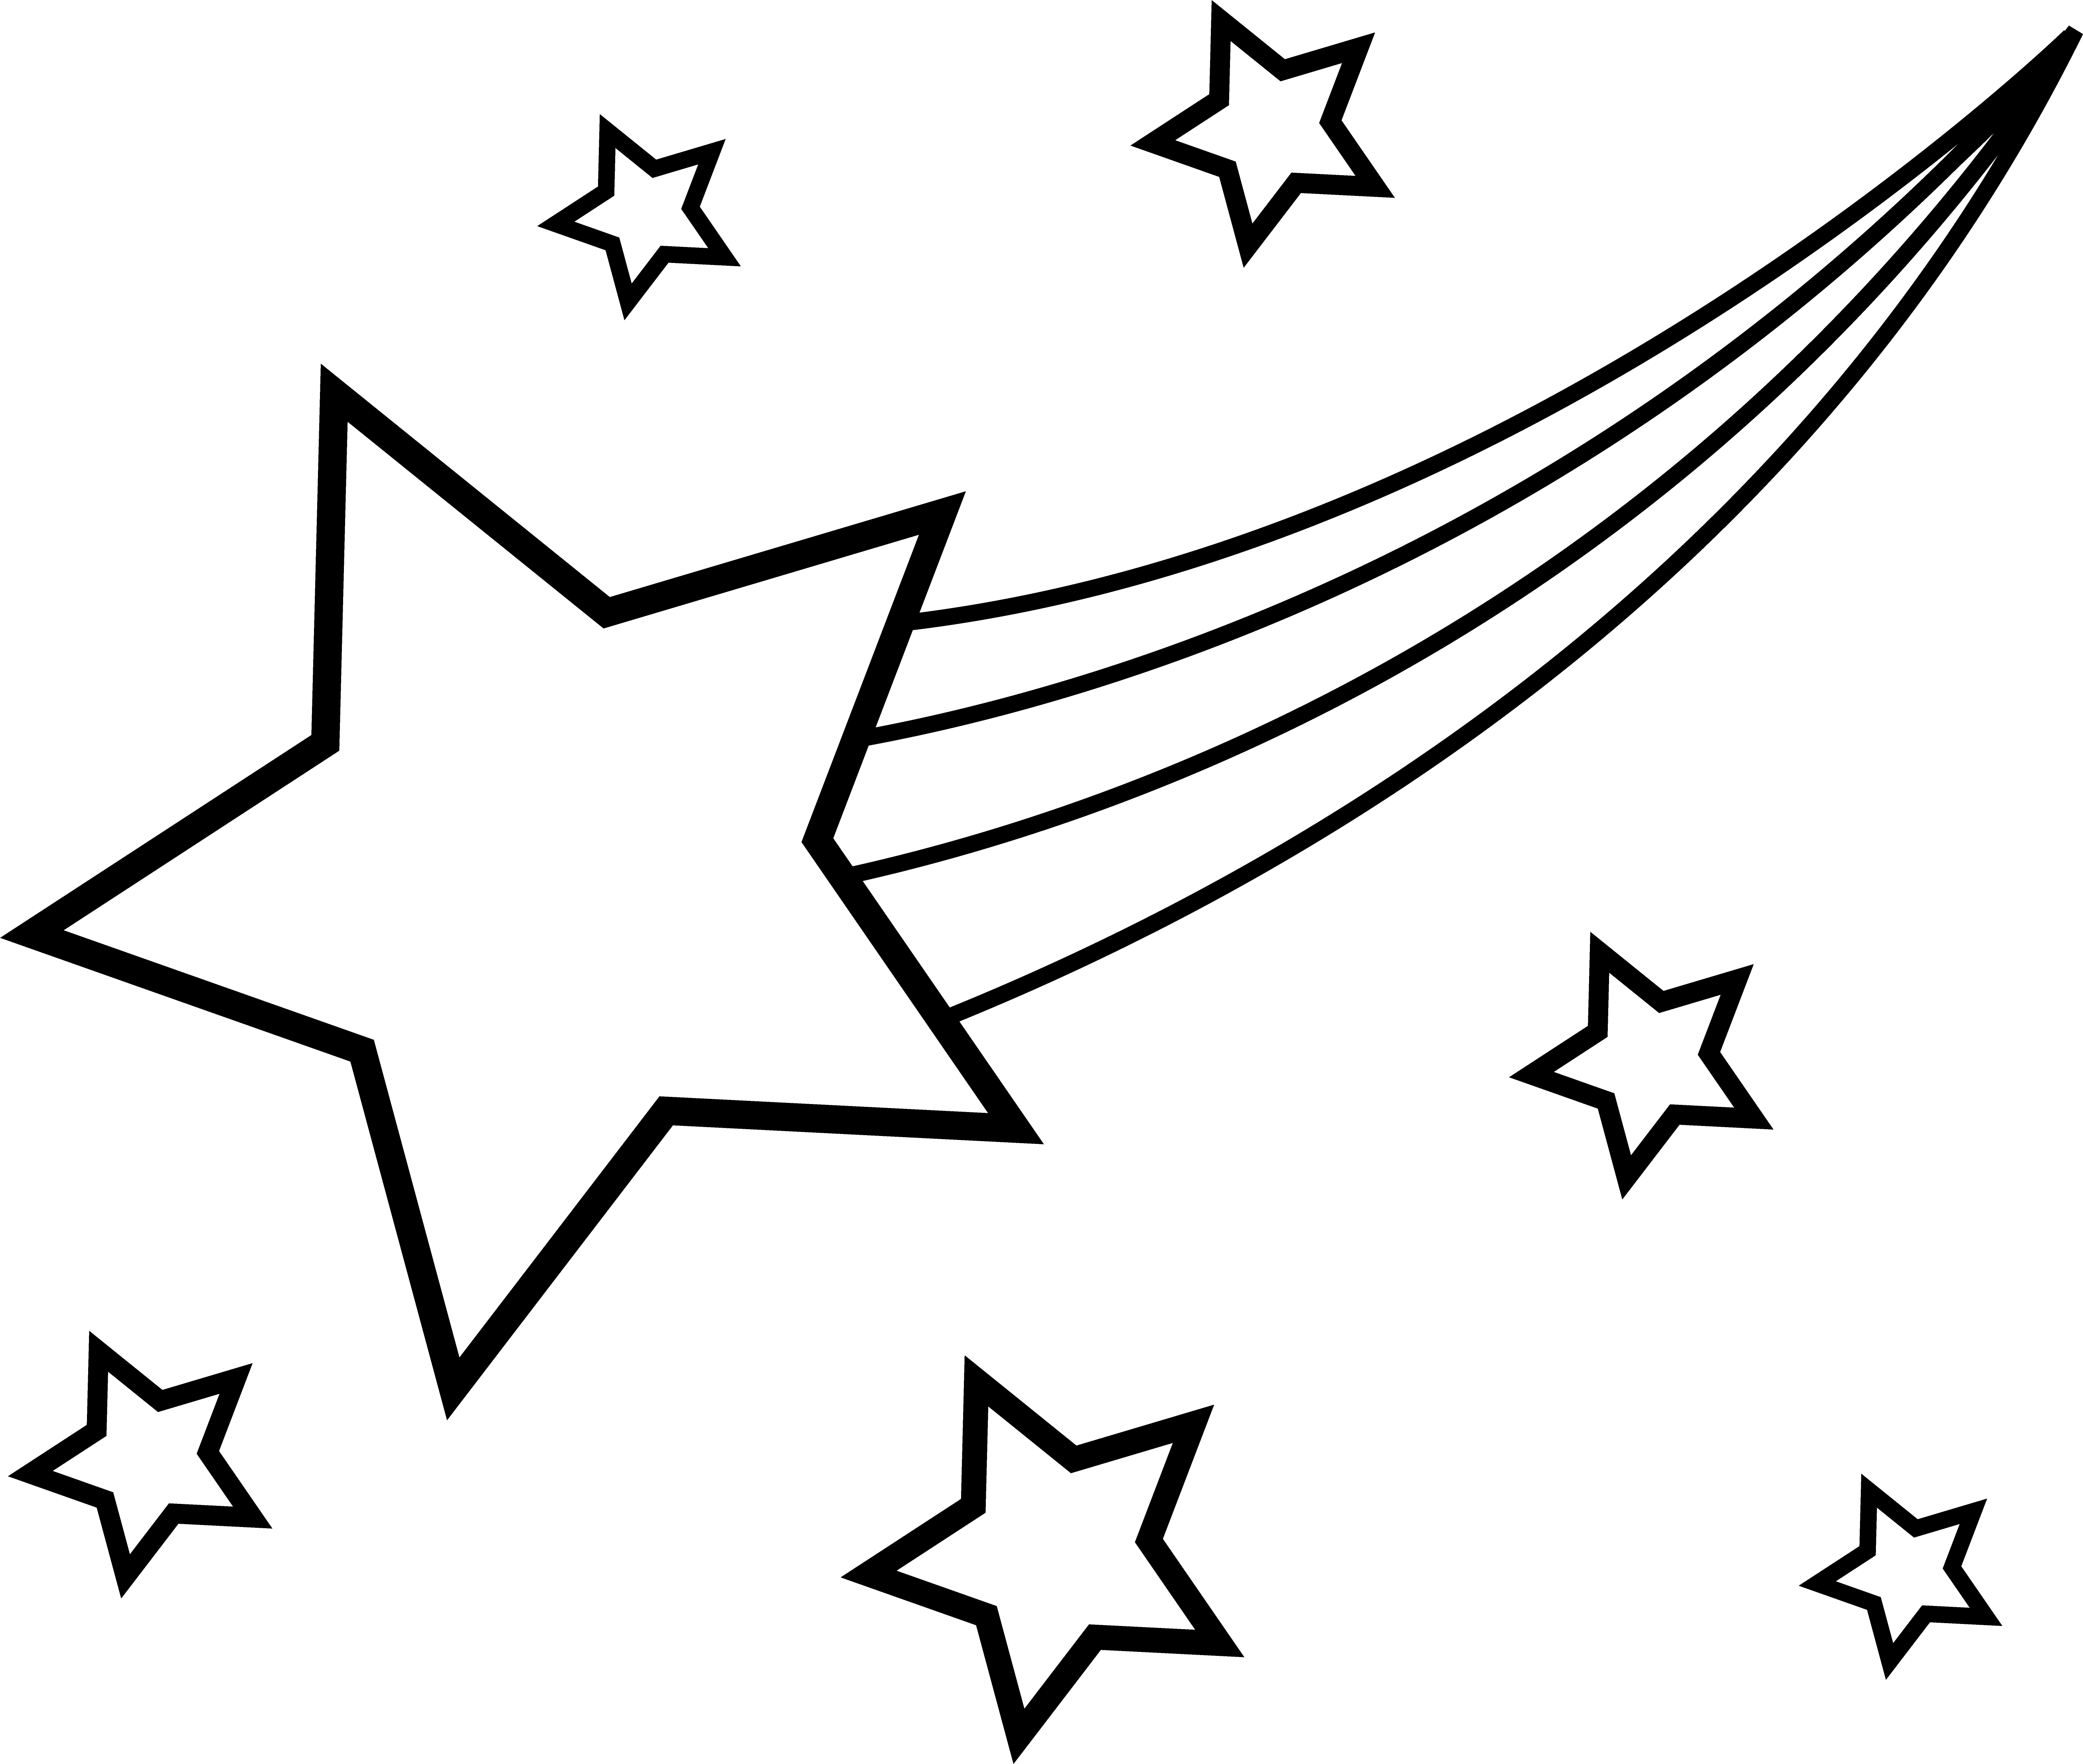 Shooting Stars Drawing - ClipArt Best